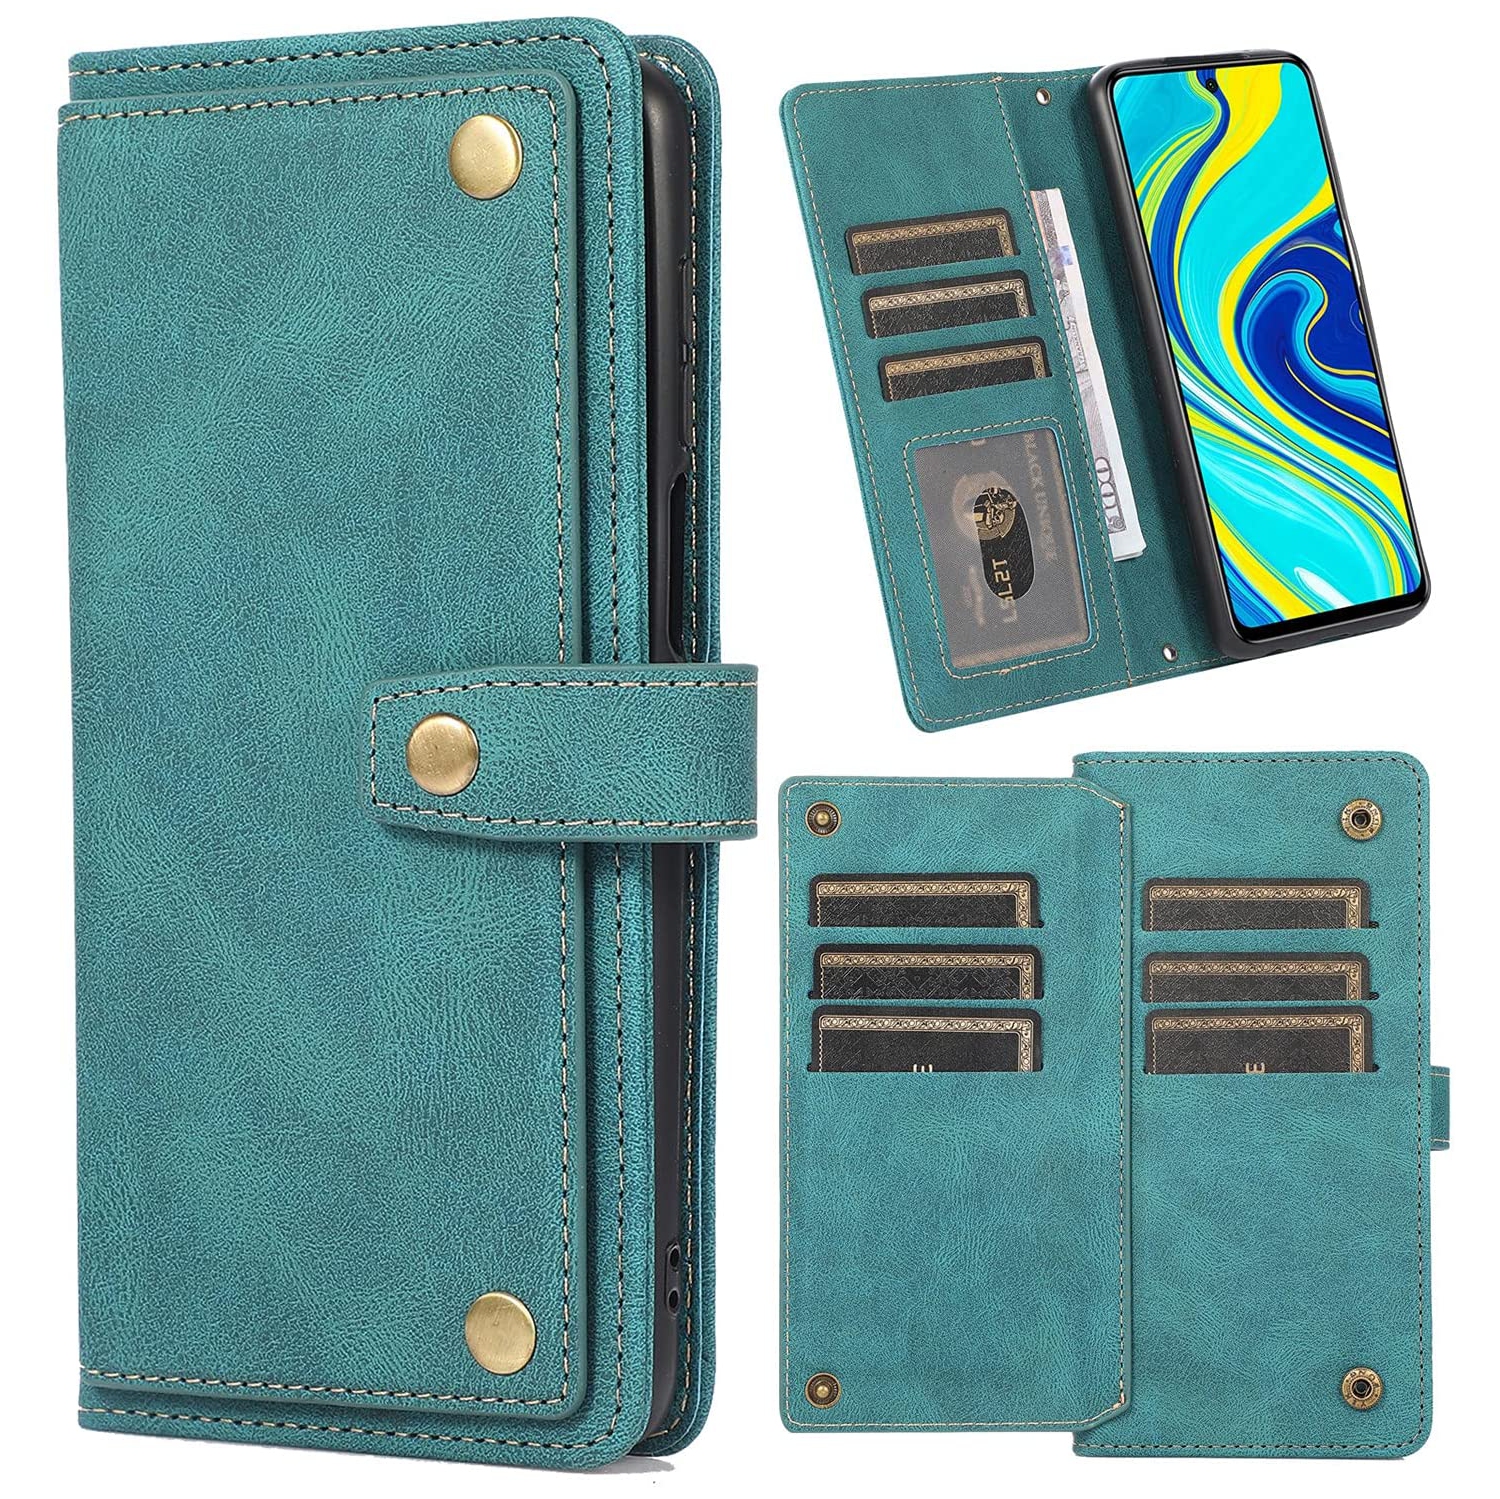 Loris & Case Retro Flip Wallet Case with 9 Card Slots Kickstand PU Leather Folio Wrist Strap Purse Phone Cover for Samsung Galaxy S22 -Cyan (FREE SHIPPING)